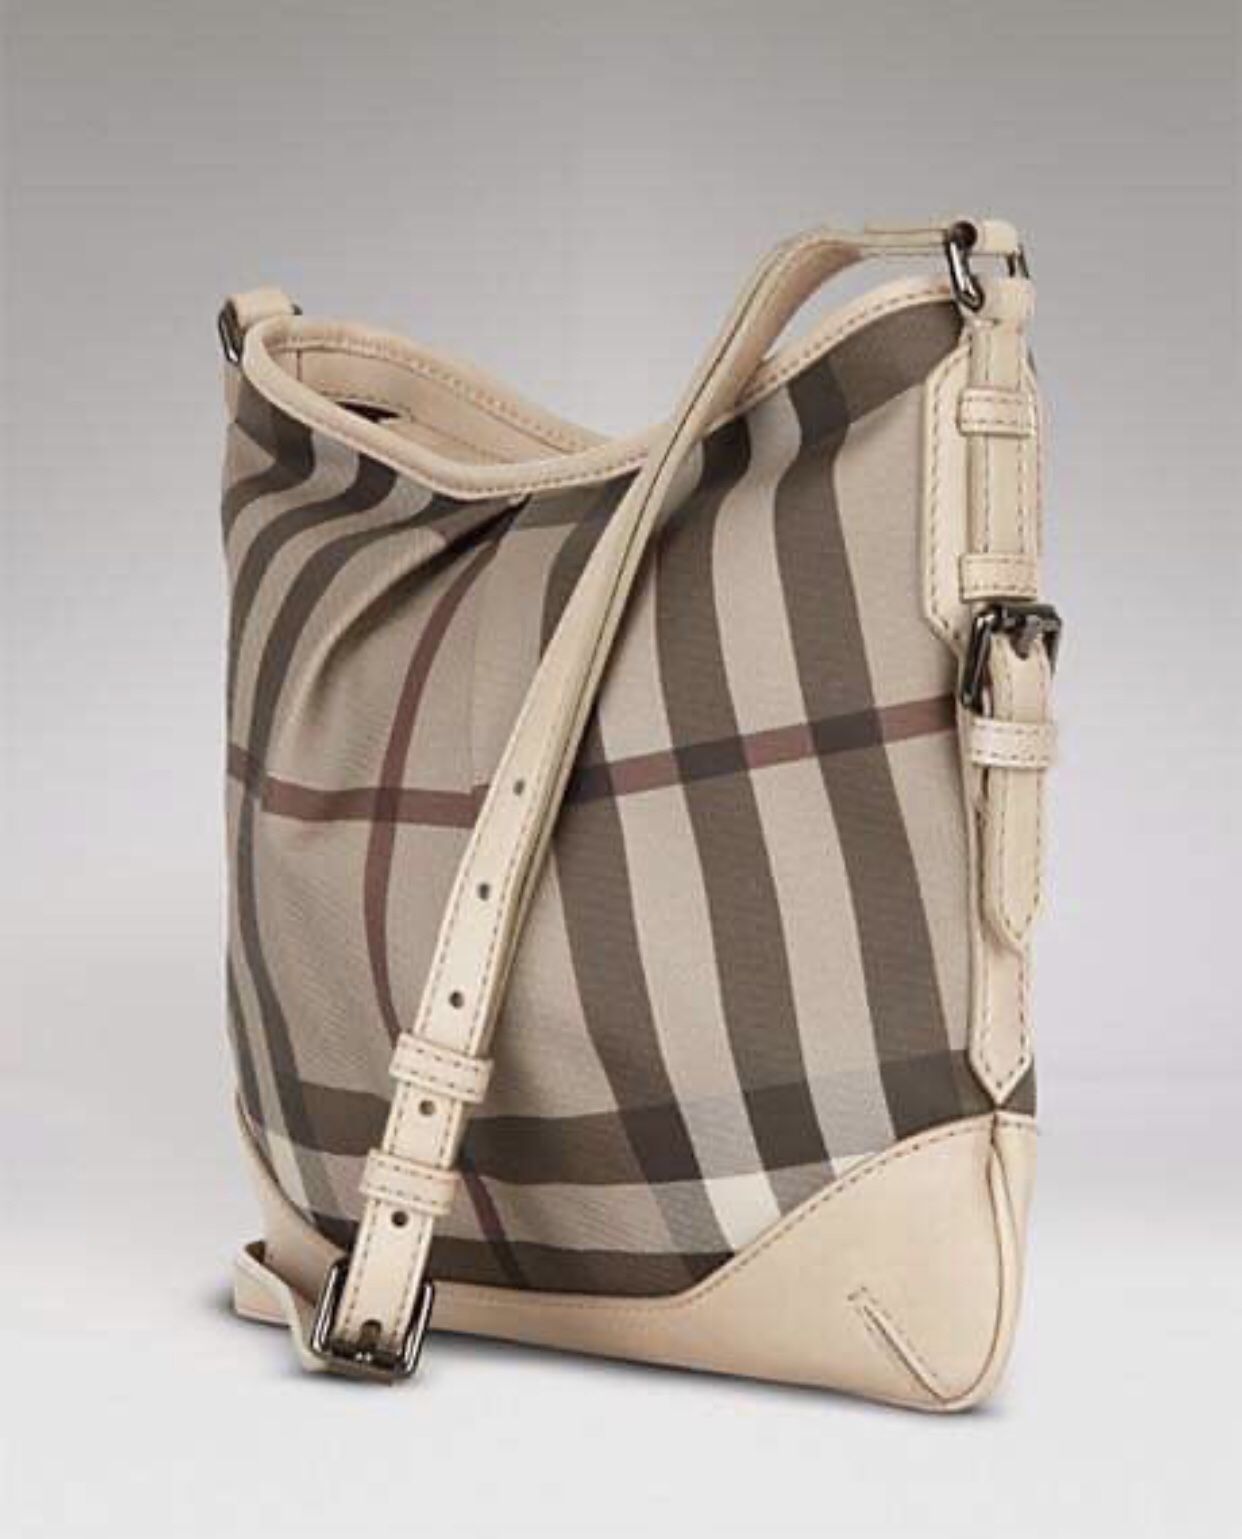 New!!! Authentic Burberry Bag